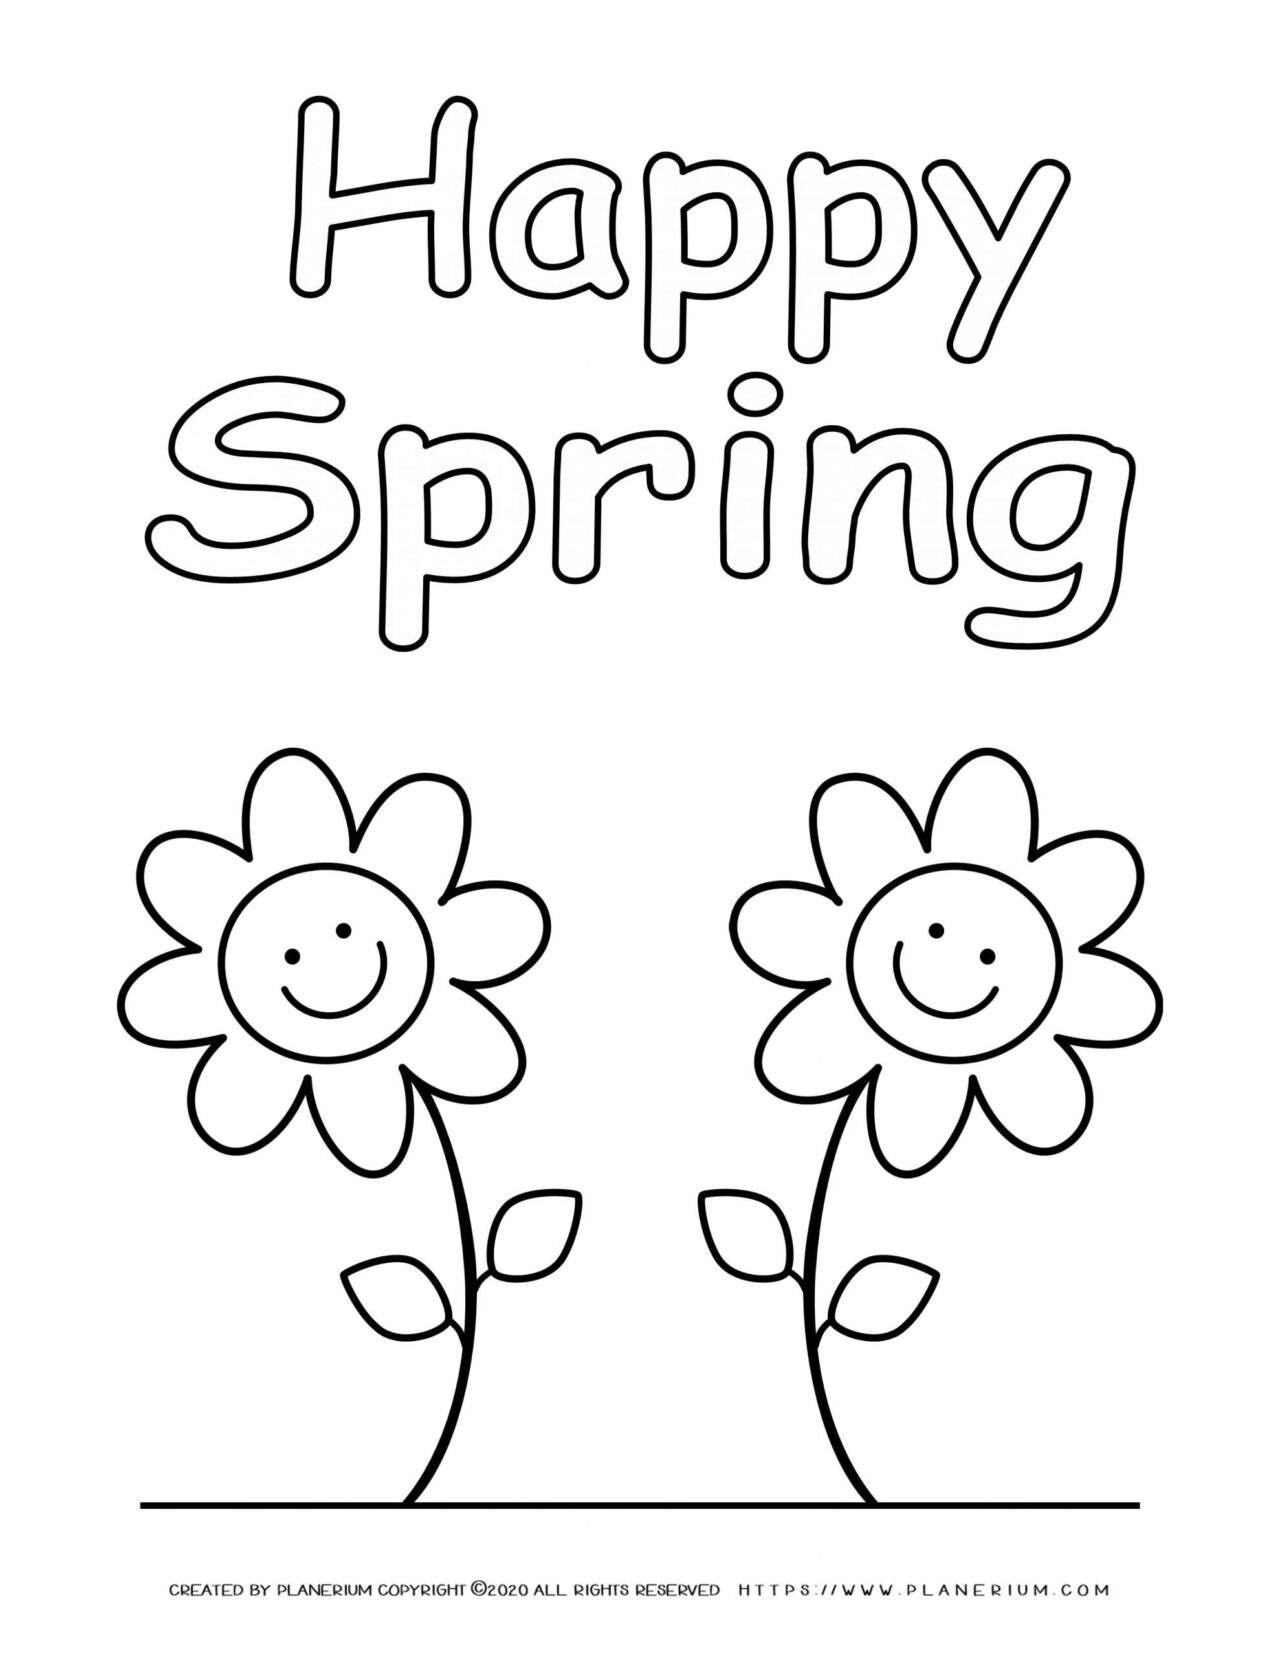 Spring coloring page with two smiling flowers